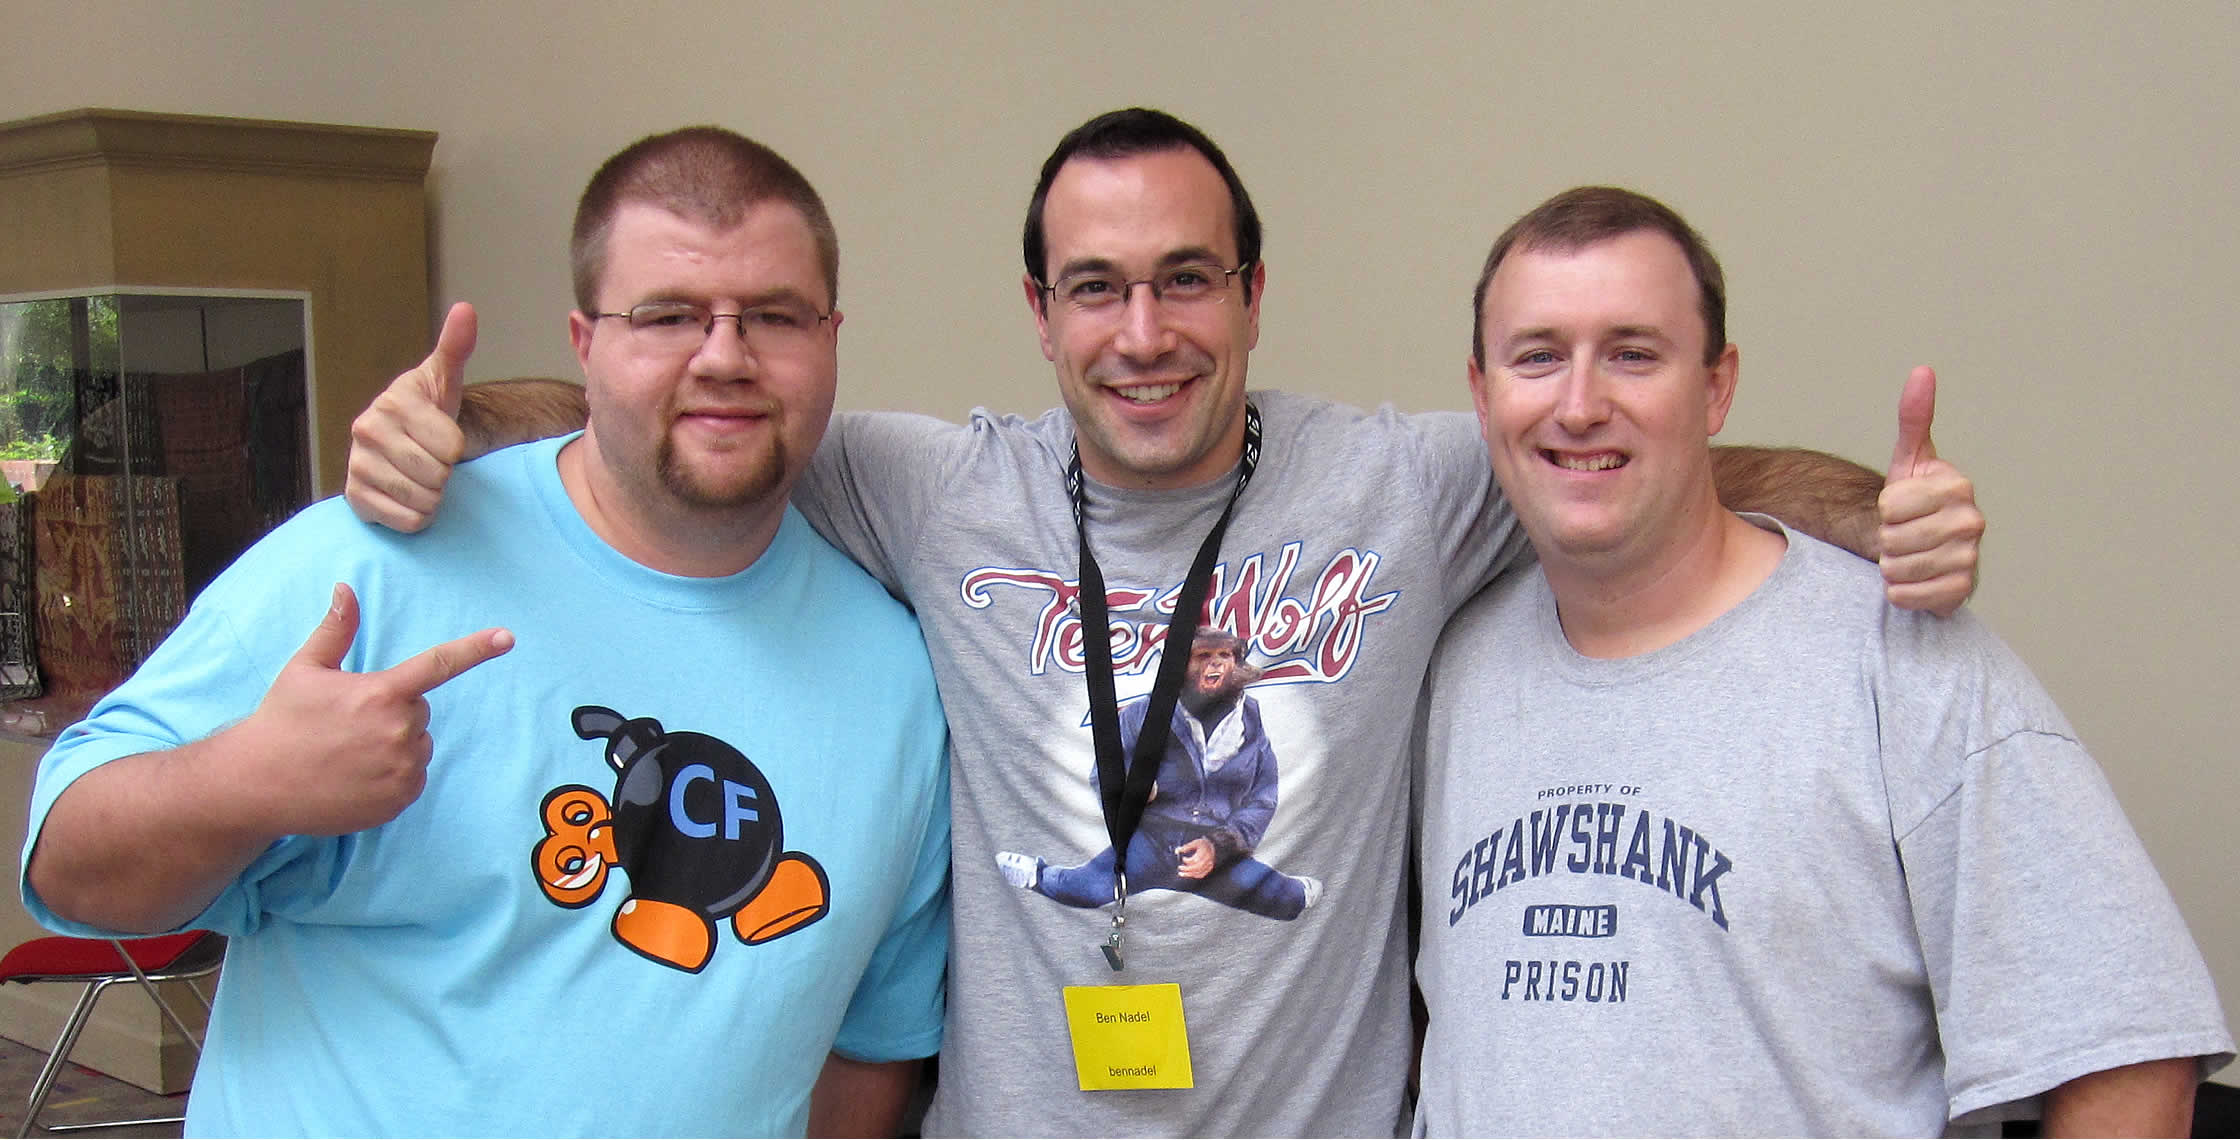 Ben Nadel at NCDevCon 2011 (Raleigh, NC) with: Joe Casper and Chris Bickford